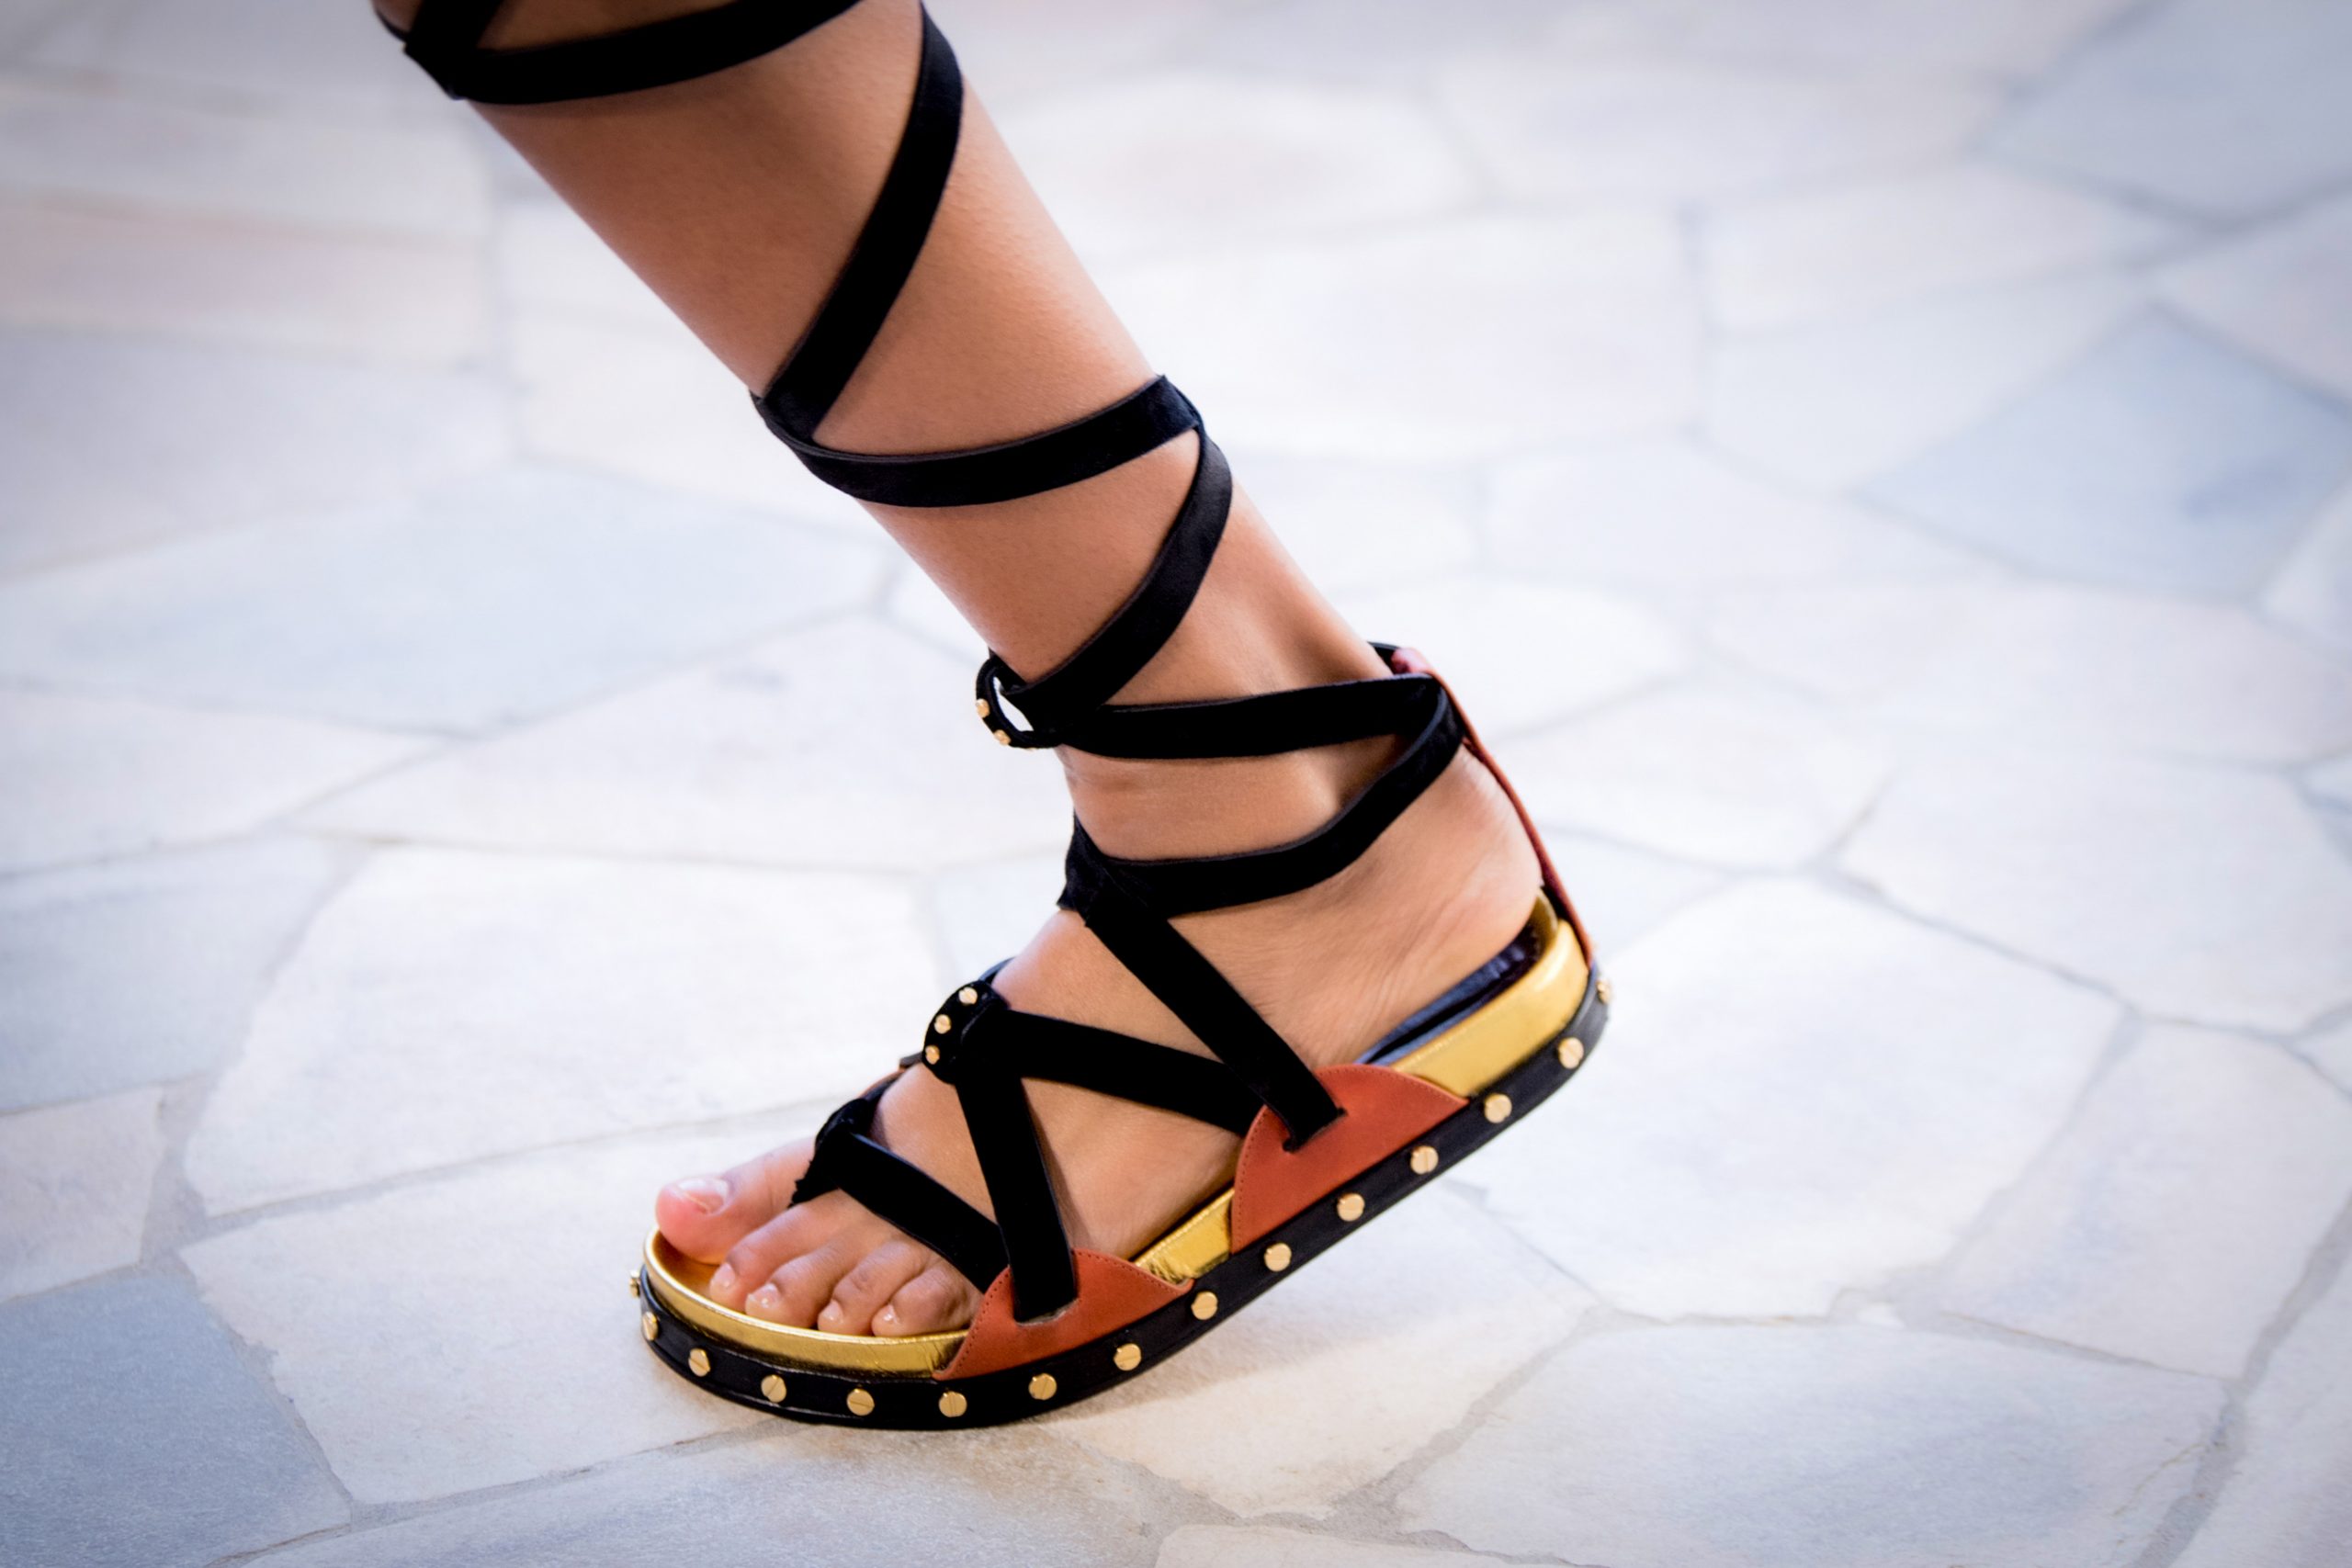 Best 50 Shoes Of Spring 2021 RTW Fashion Shows | The Impression